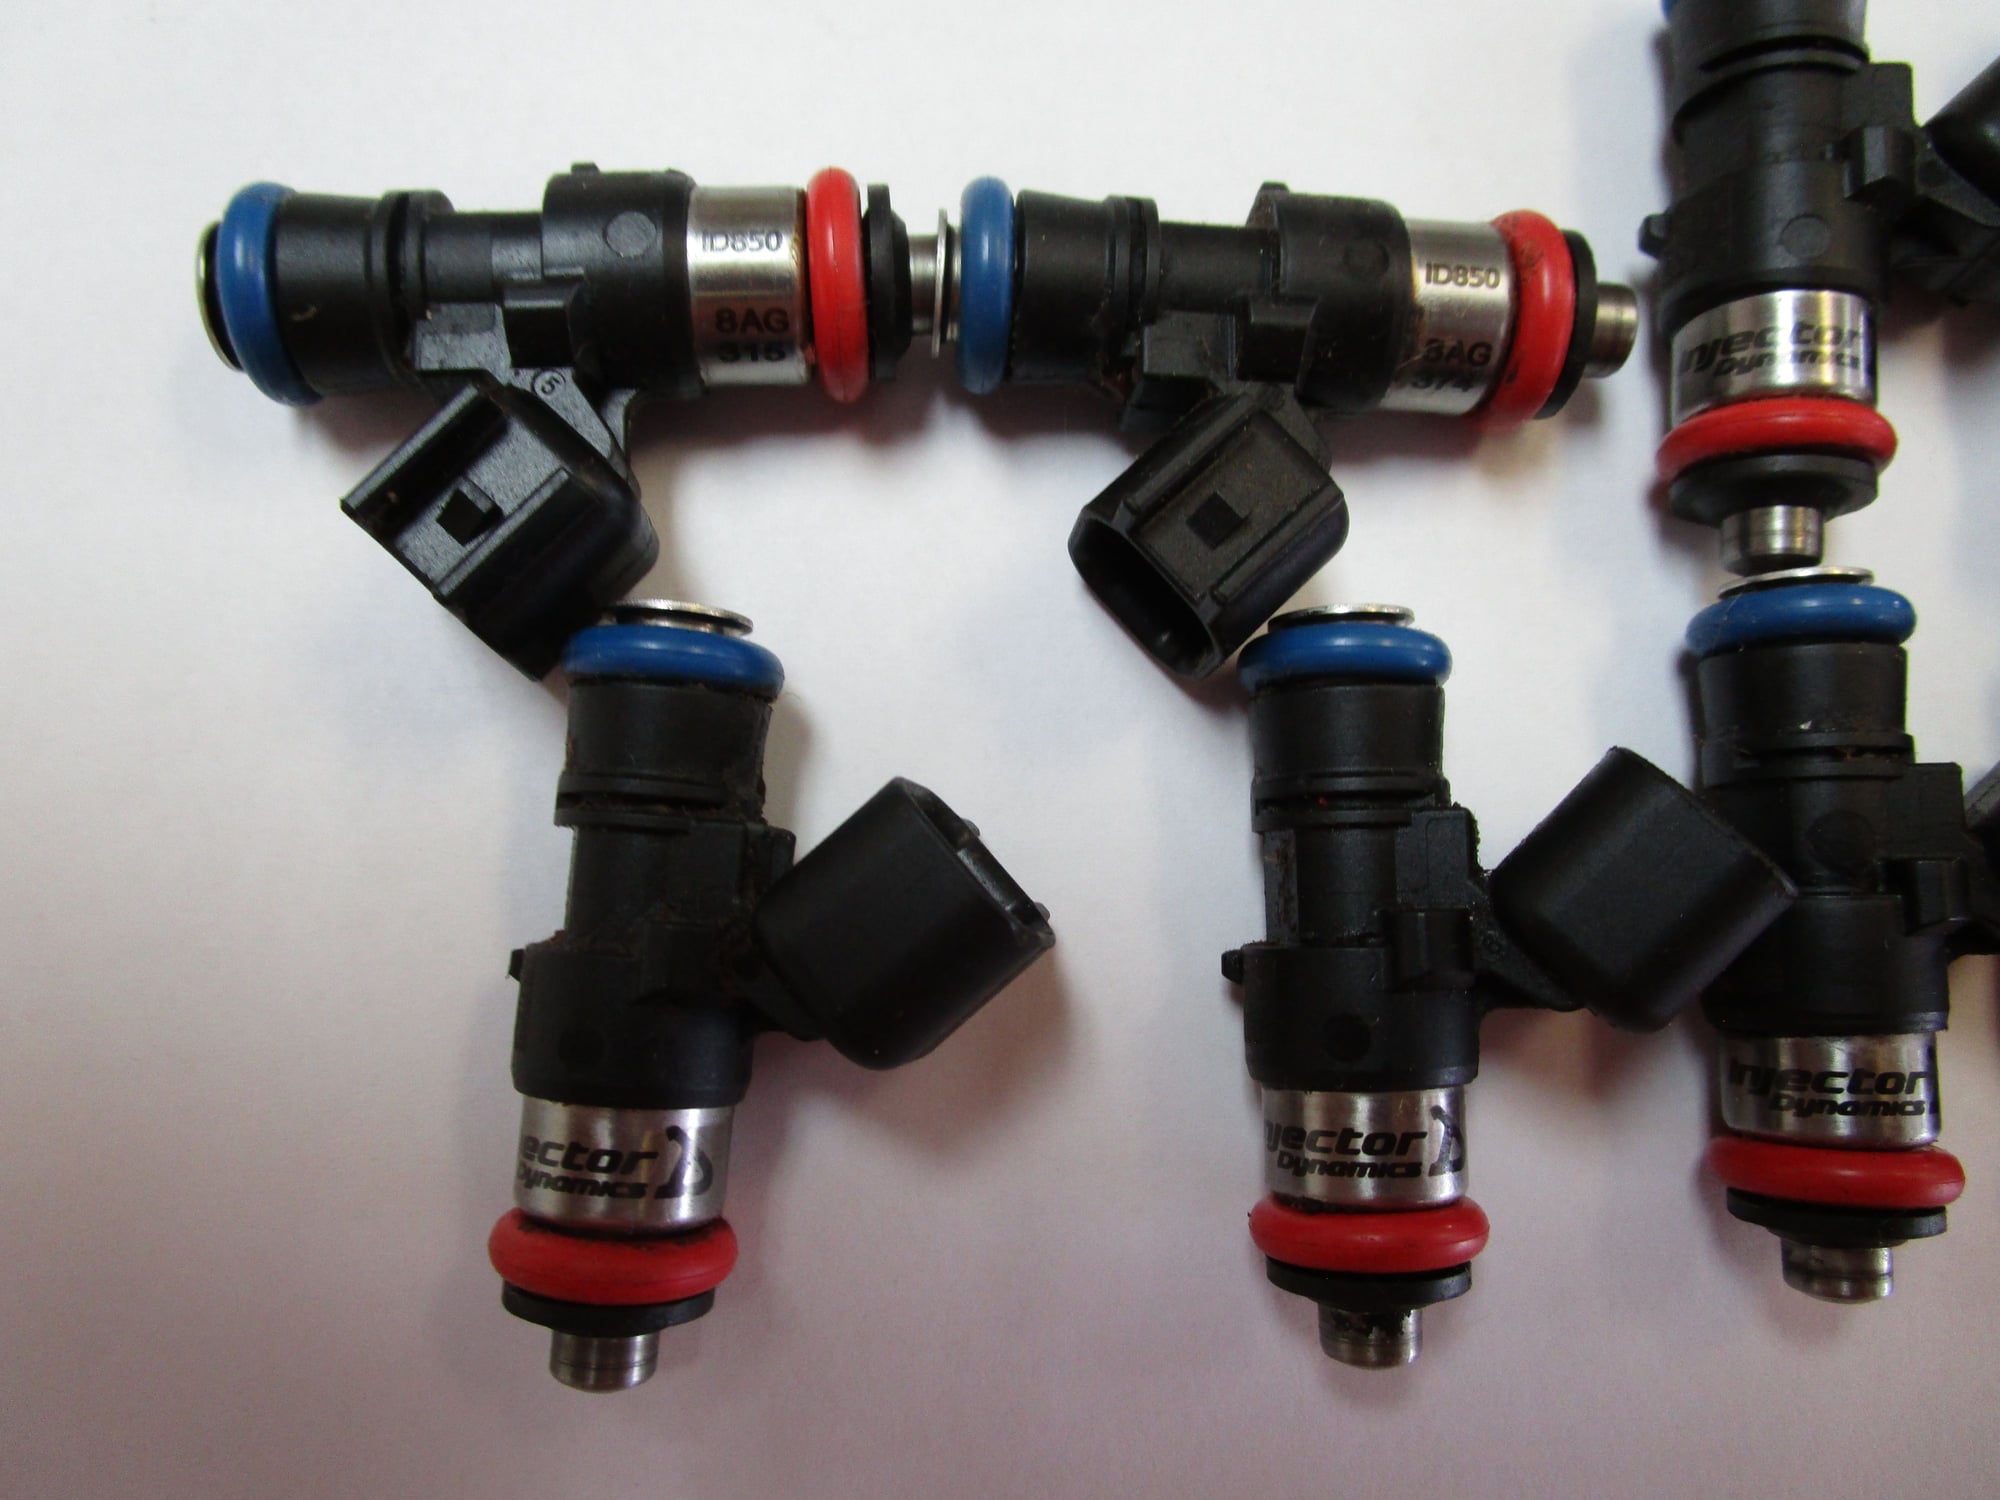  - (8)  ID850 LS3 style injectors - Whiteville, NC 28472, United States